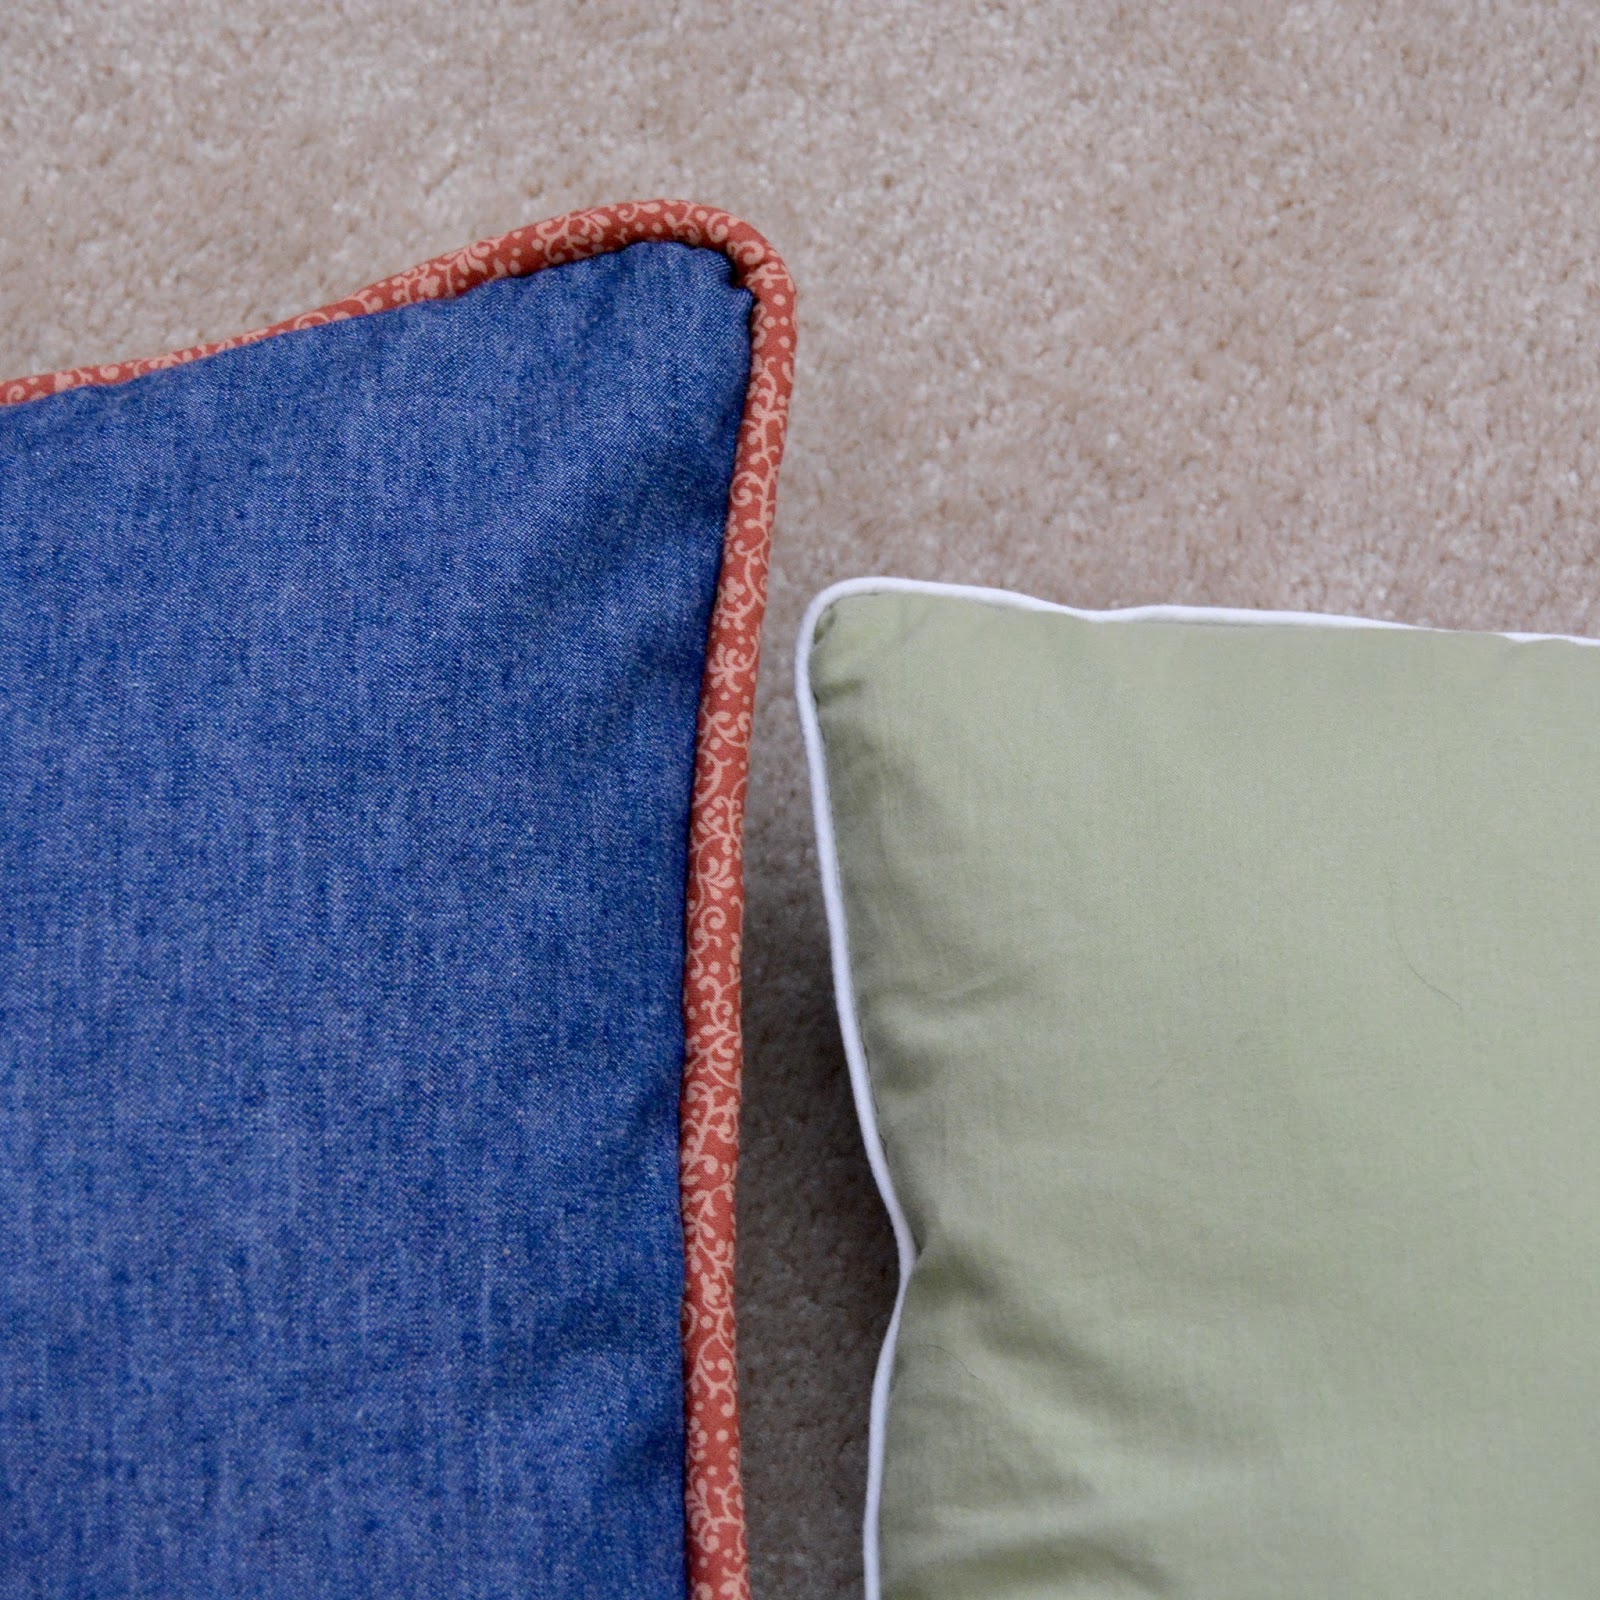 How To Sew Sofa Cushions (With A Piped Edge!)